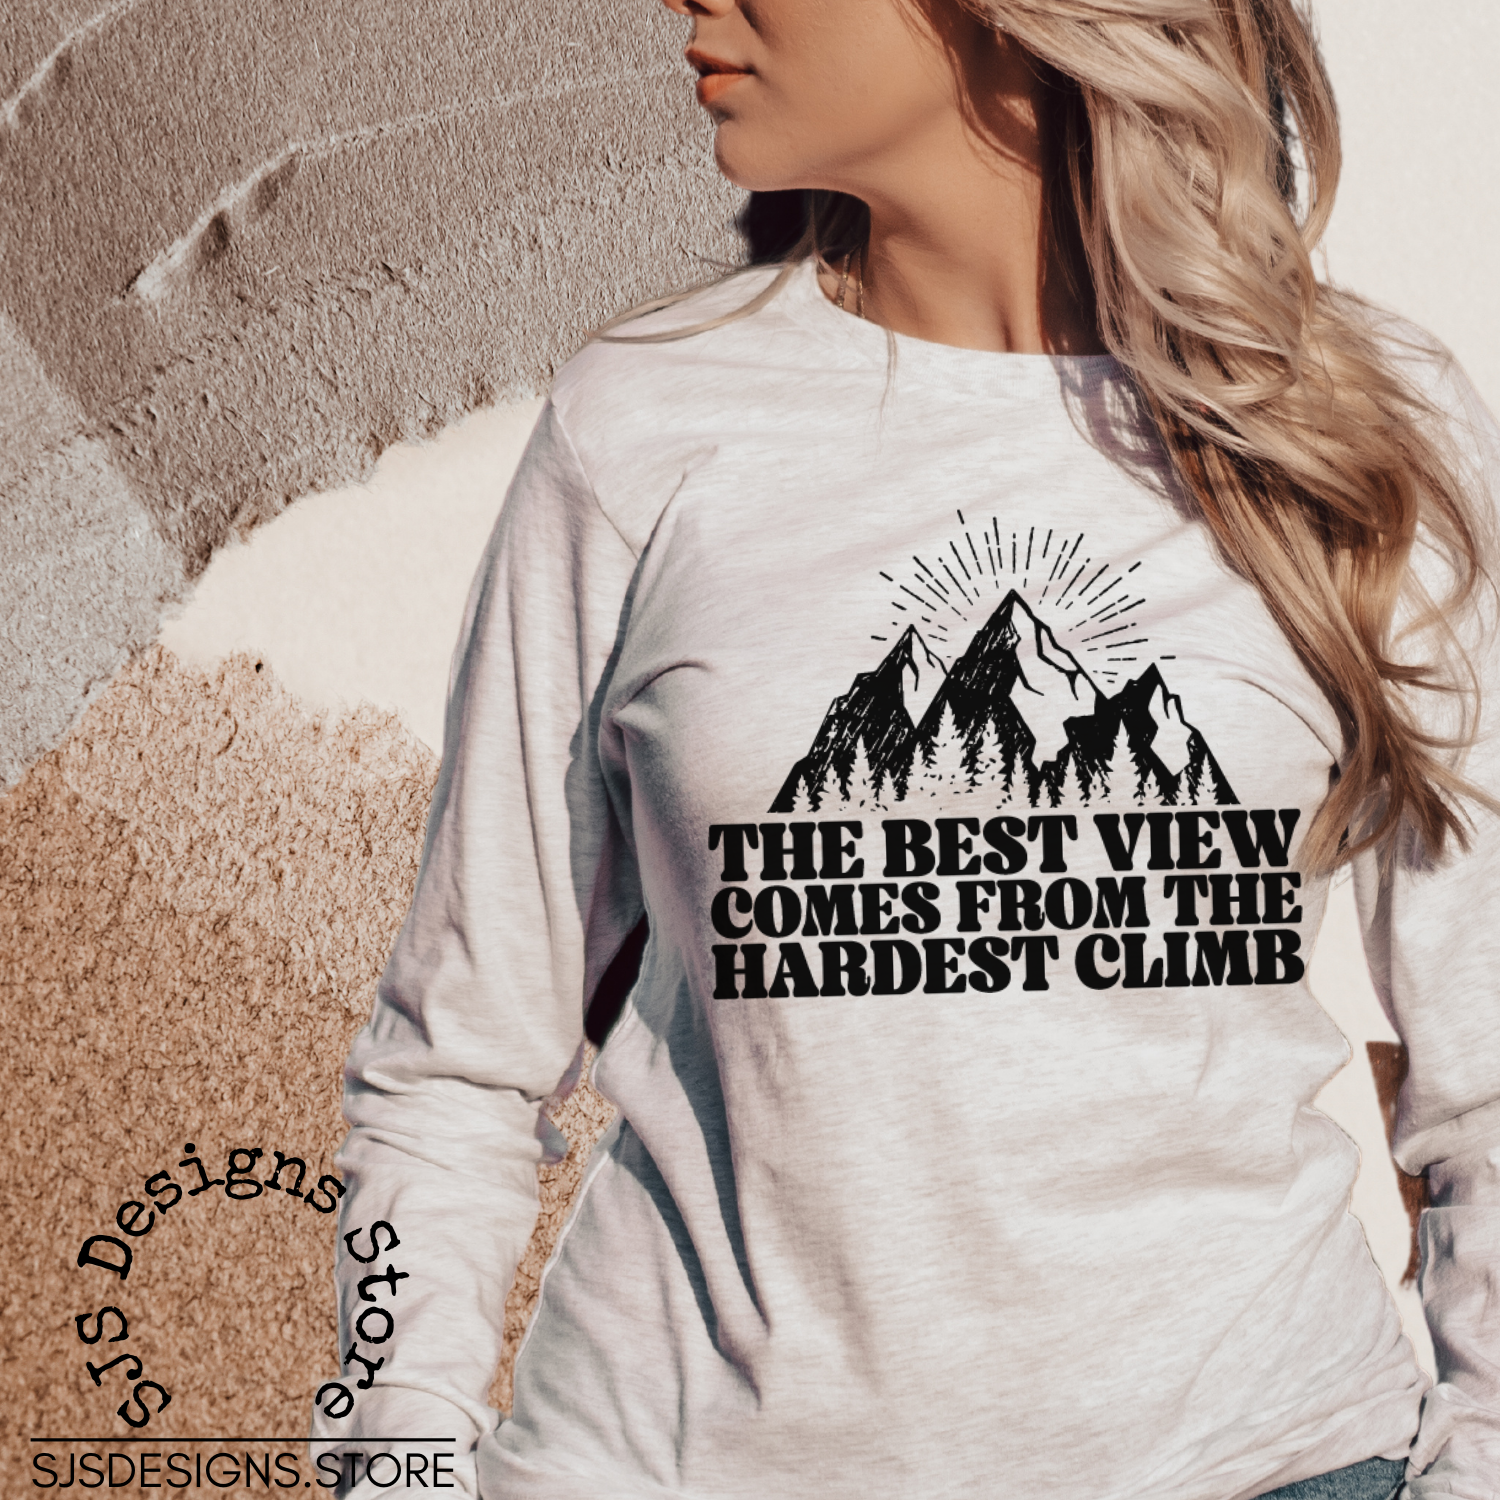 The Best View Comes From the Hardest Climb Shirt